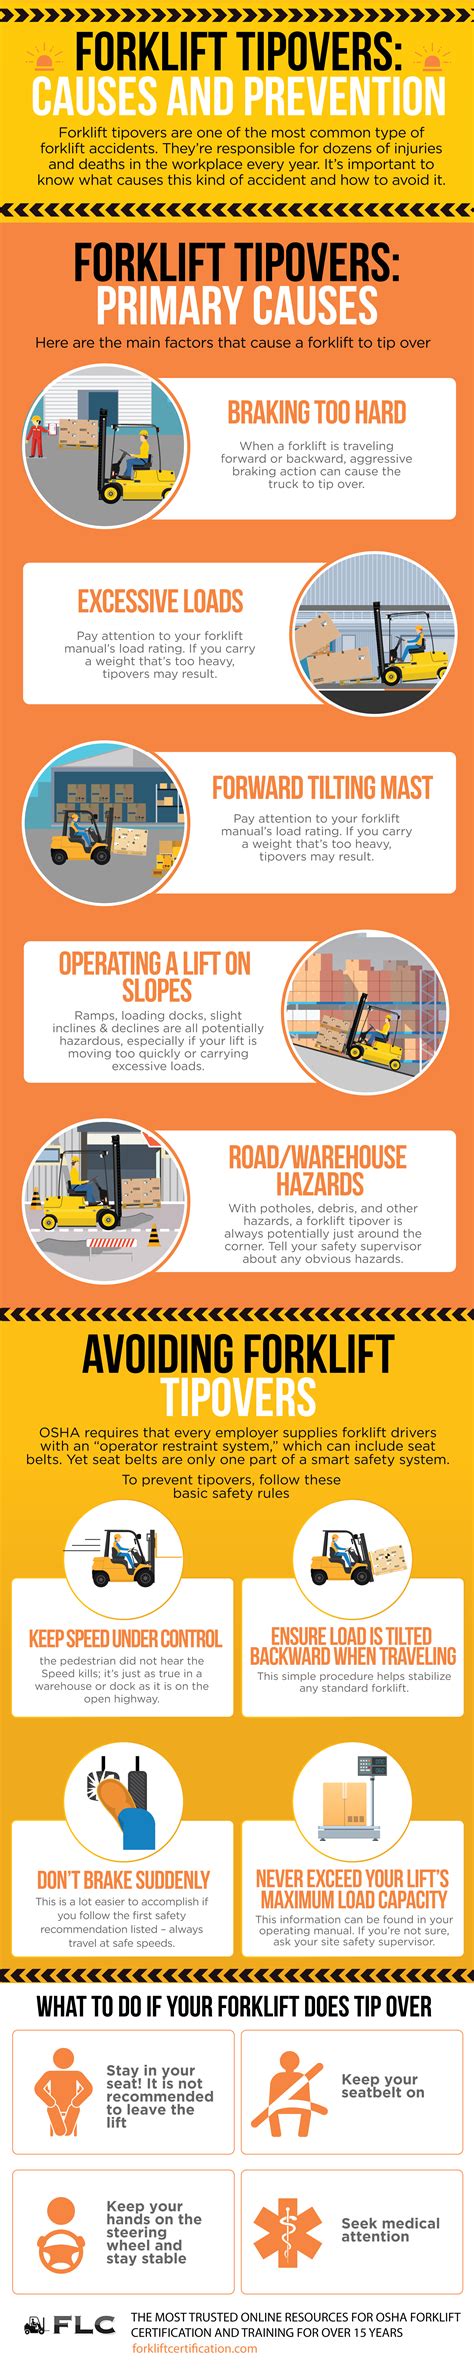 Why Would A Forklift Tip Over